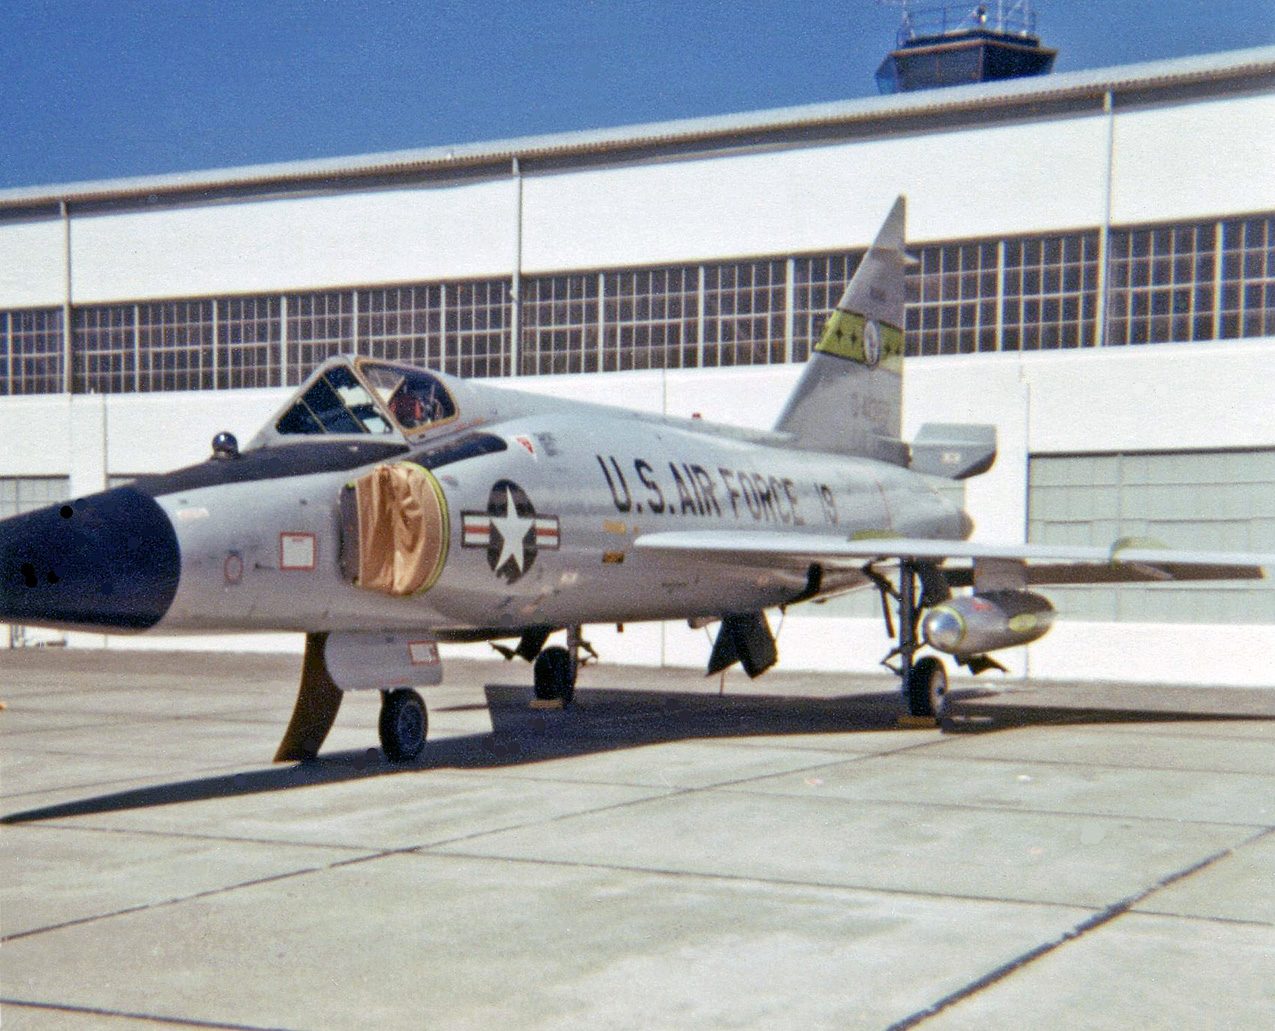 This is Hamilton AFB in Marin County, California in 1970 and the airplane is a visiting Convair F-102 "Delta Dagger" interceptor belonging to the Idaho Air National Guard.  Note the air intakes have been papered-over to keep hot dog wrappers, pop cans and various other airshow debris from damaging the engine when the pilot cranks up to fly home. It's too bad my mother didn't have a better camera.  Almost every photo she took with her Instamatic 110 was off-center to the right! View full size.